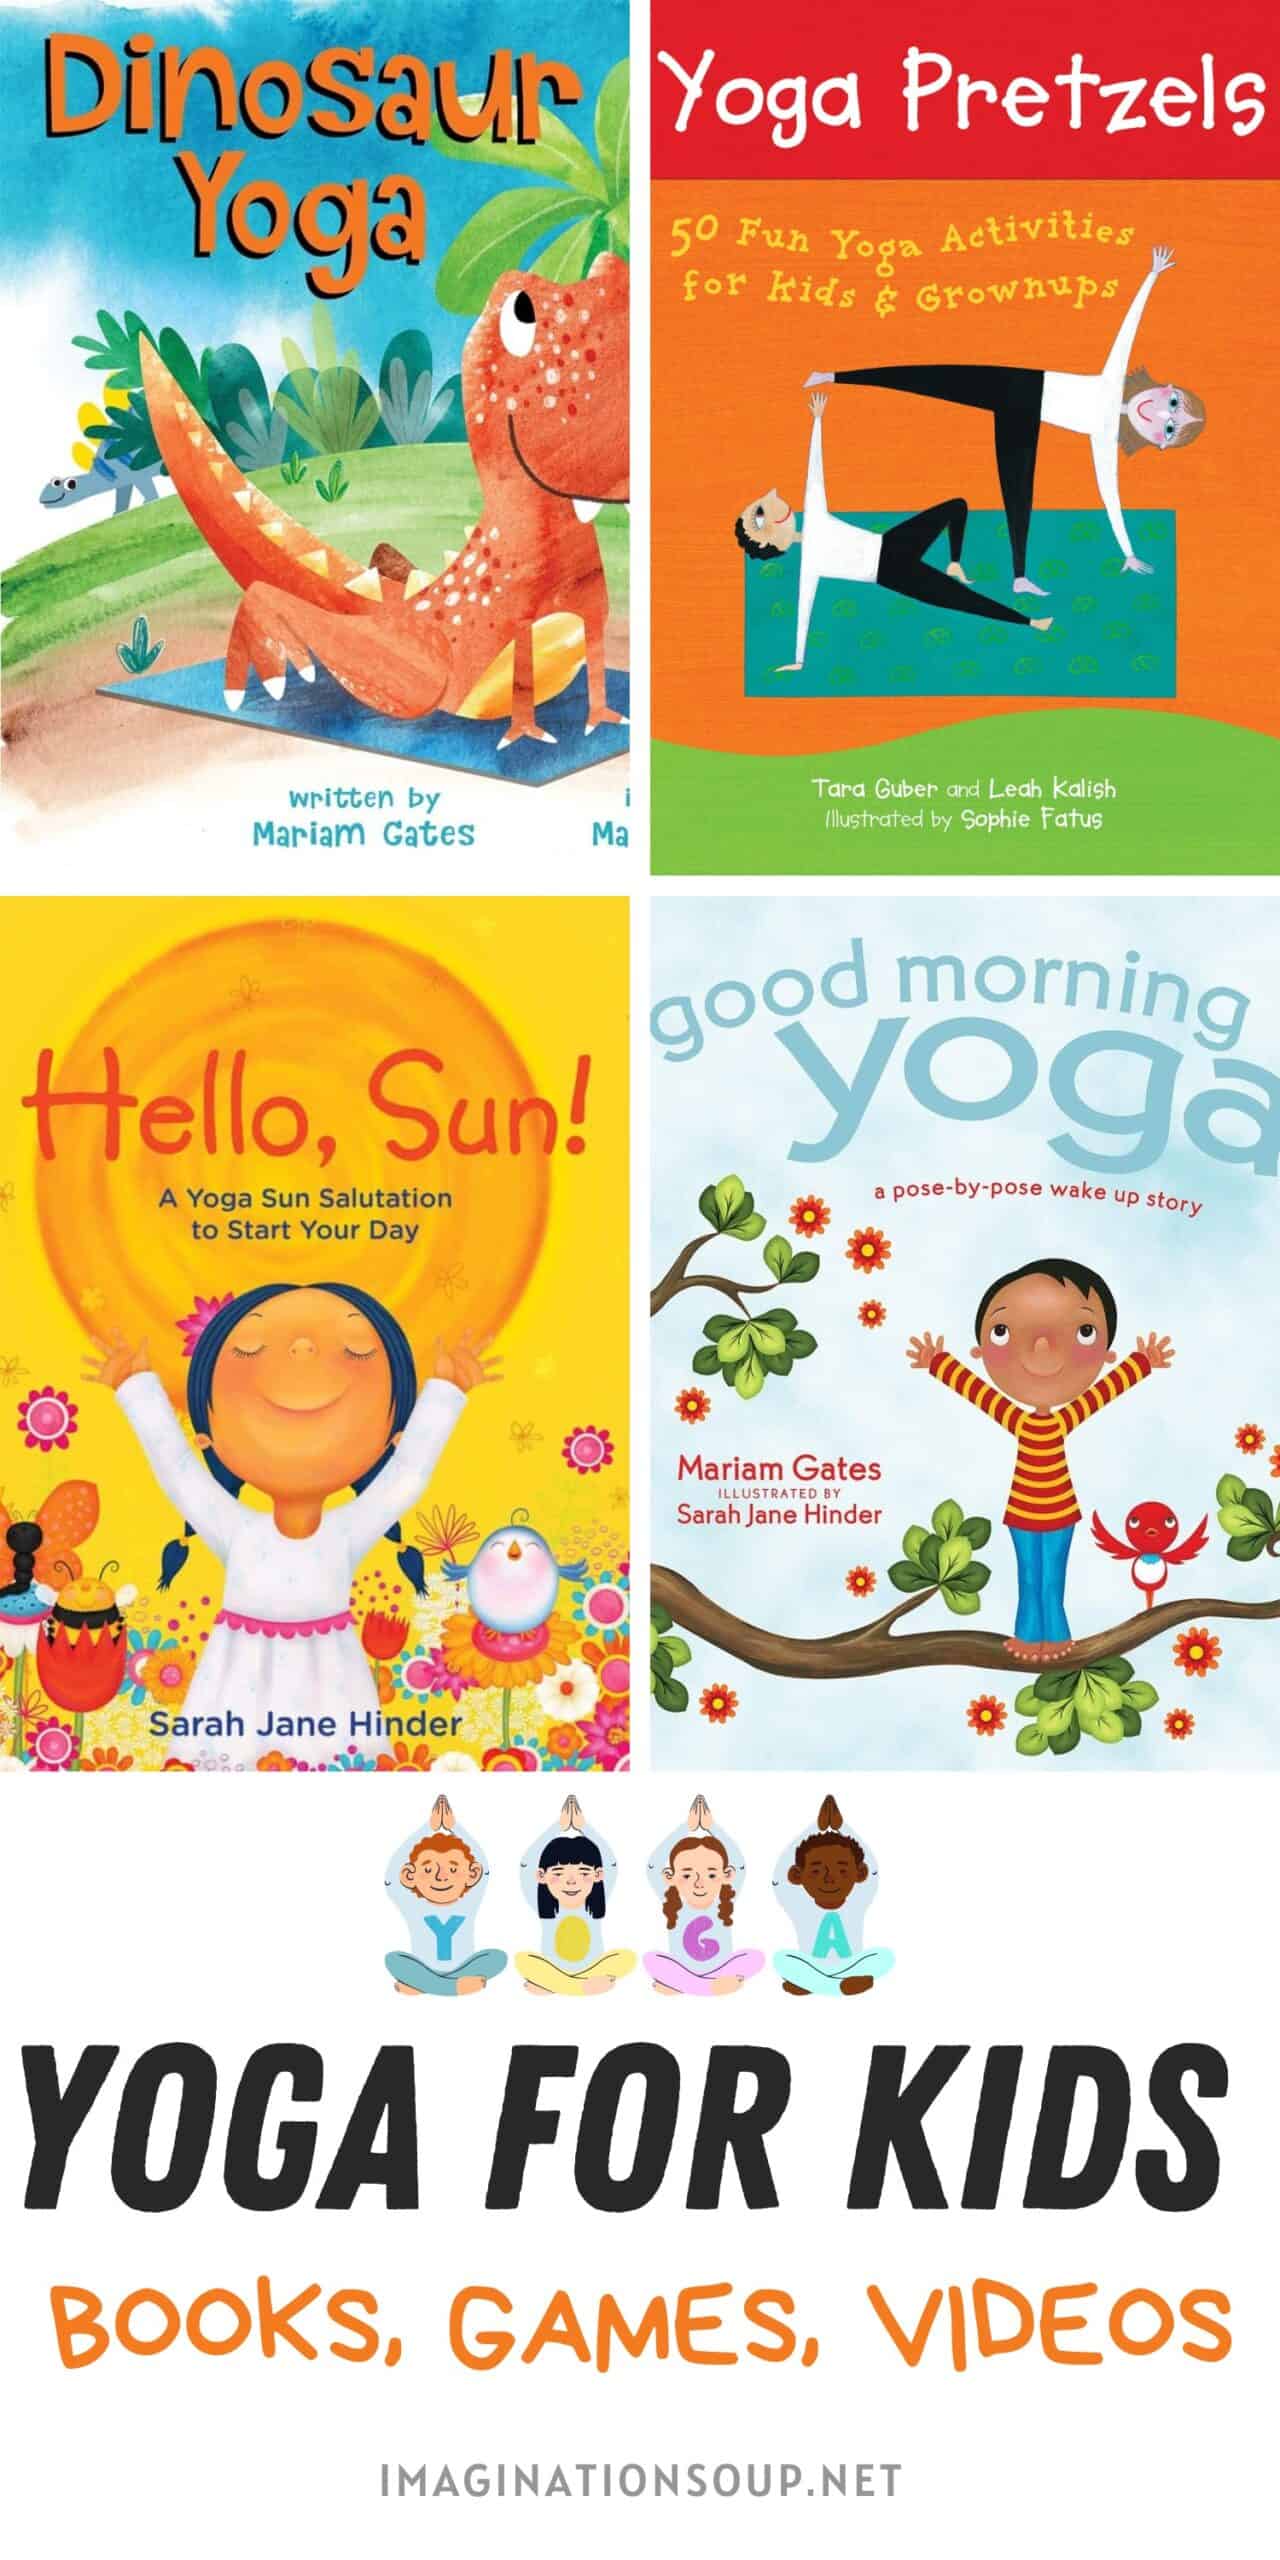 Sports for Kids: Yoga Poses that Mimic Popular Youth Sports - Kids Yoga  Stories, Yoga and mindfulness resources for kids